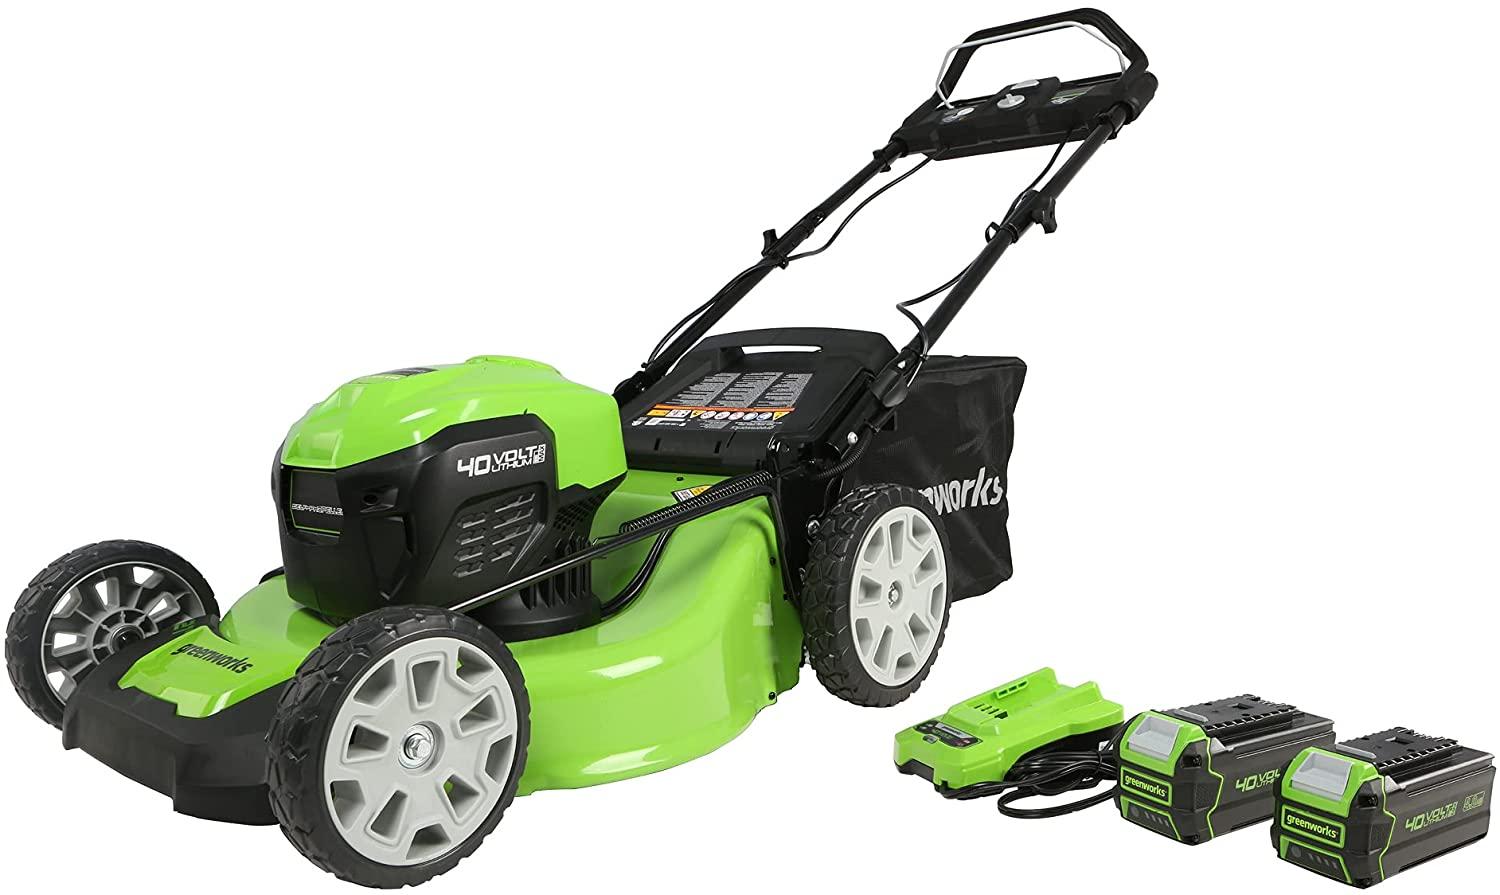 Greenworks 40V 21in Brushless Lawn Mower with Batteries for $370.99 Shipped